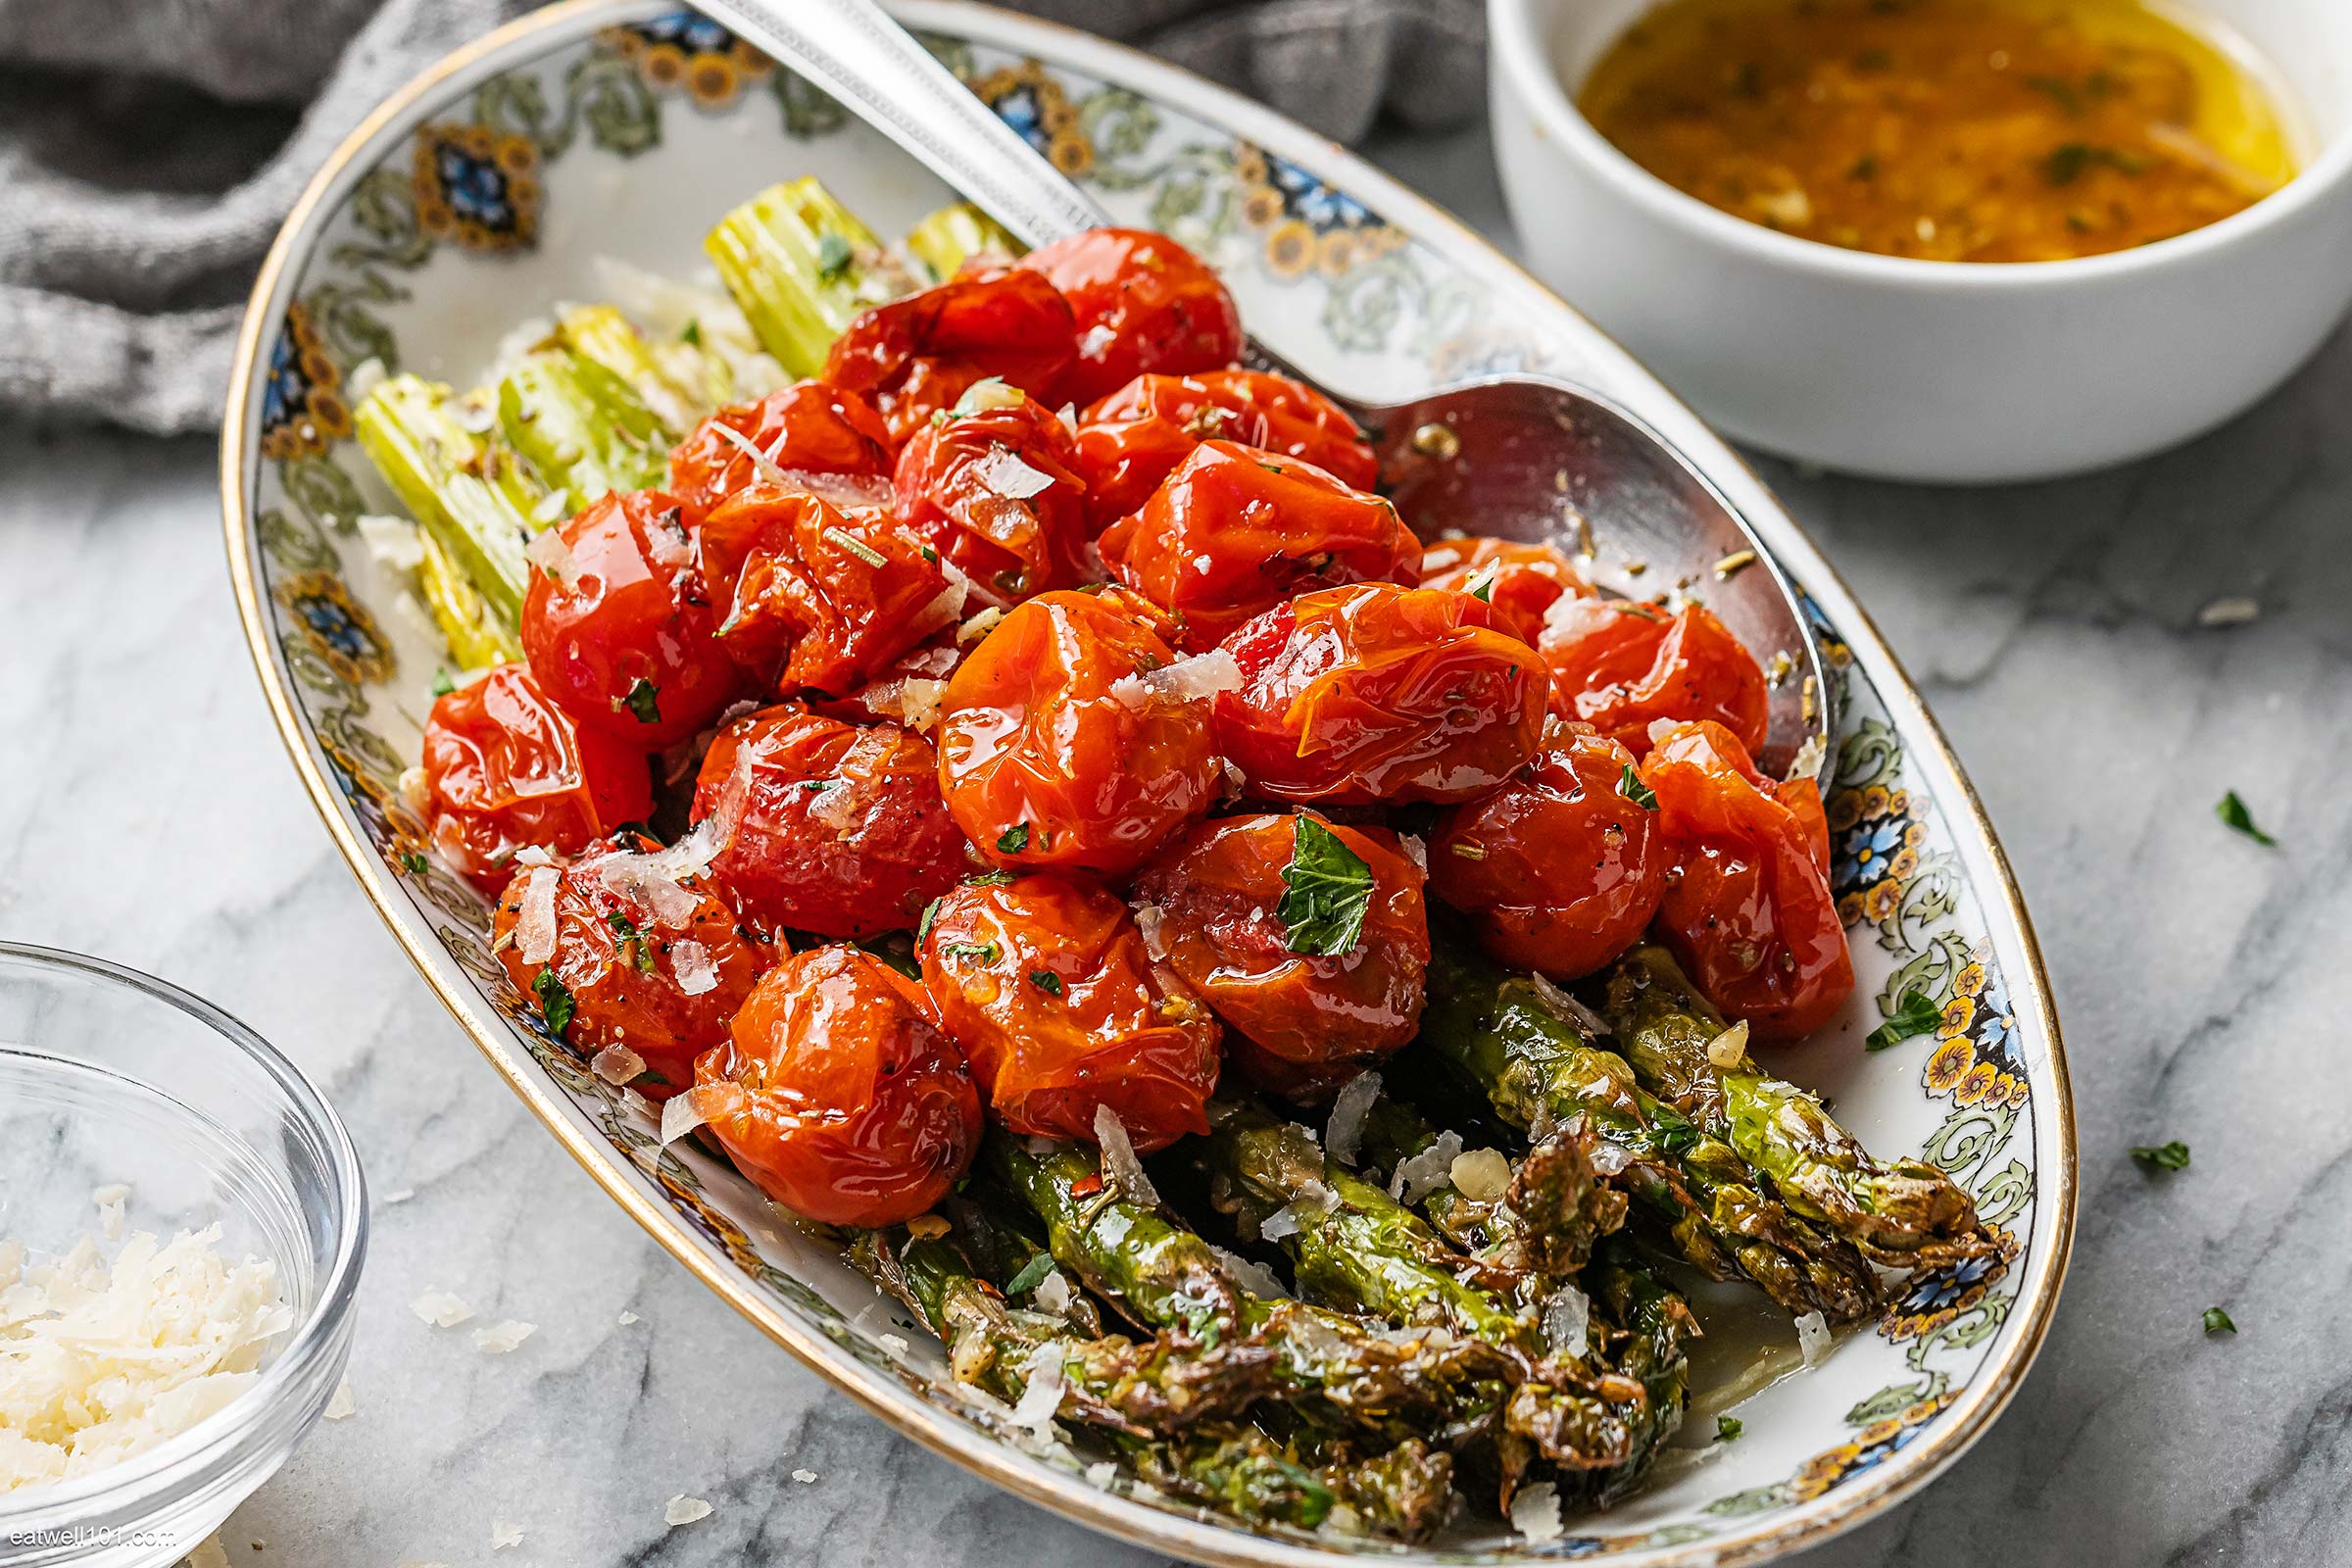 Air fryer Asparagus and Tomatoes